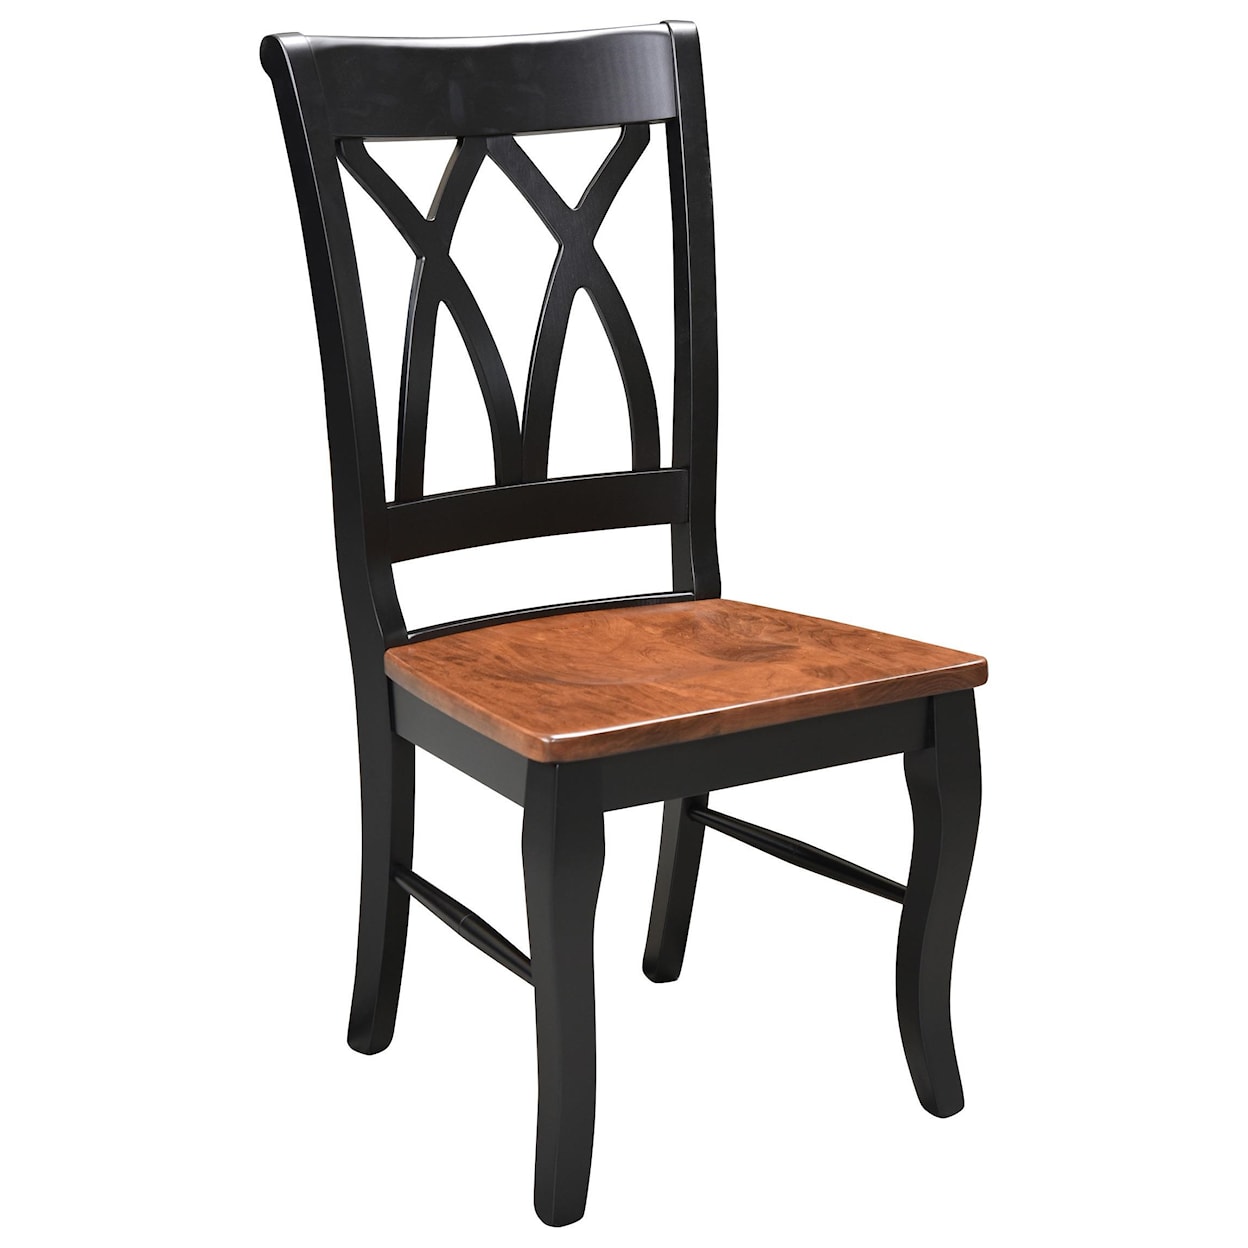 Wengerd Wood Products Stanton Side Chair